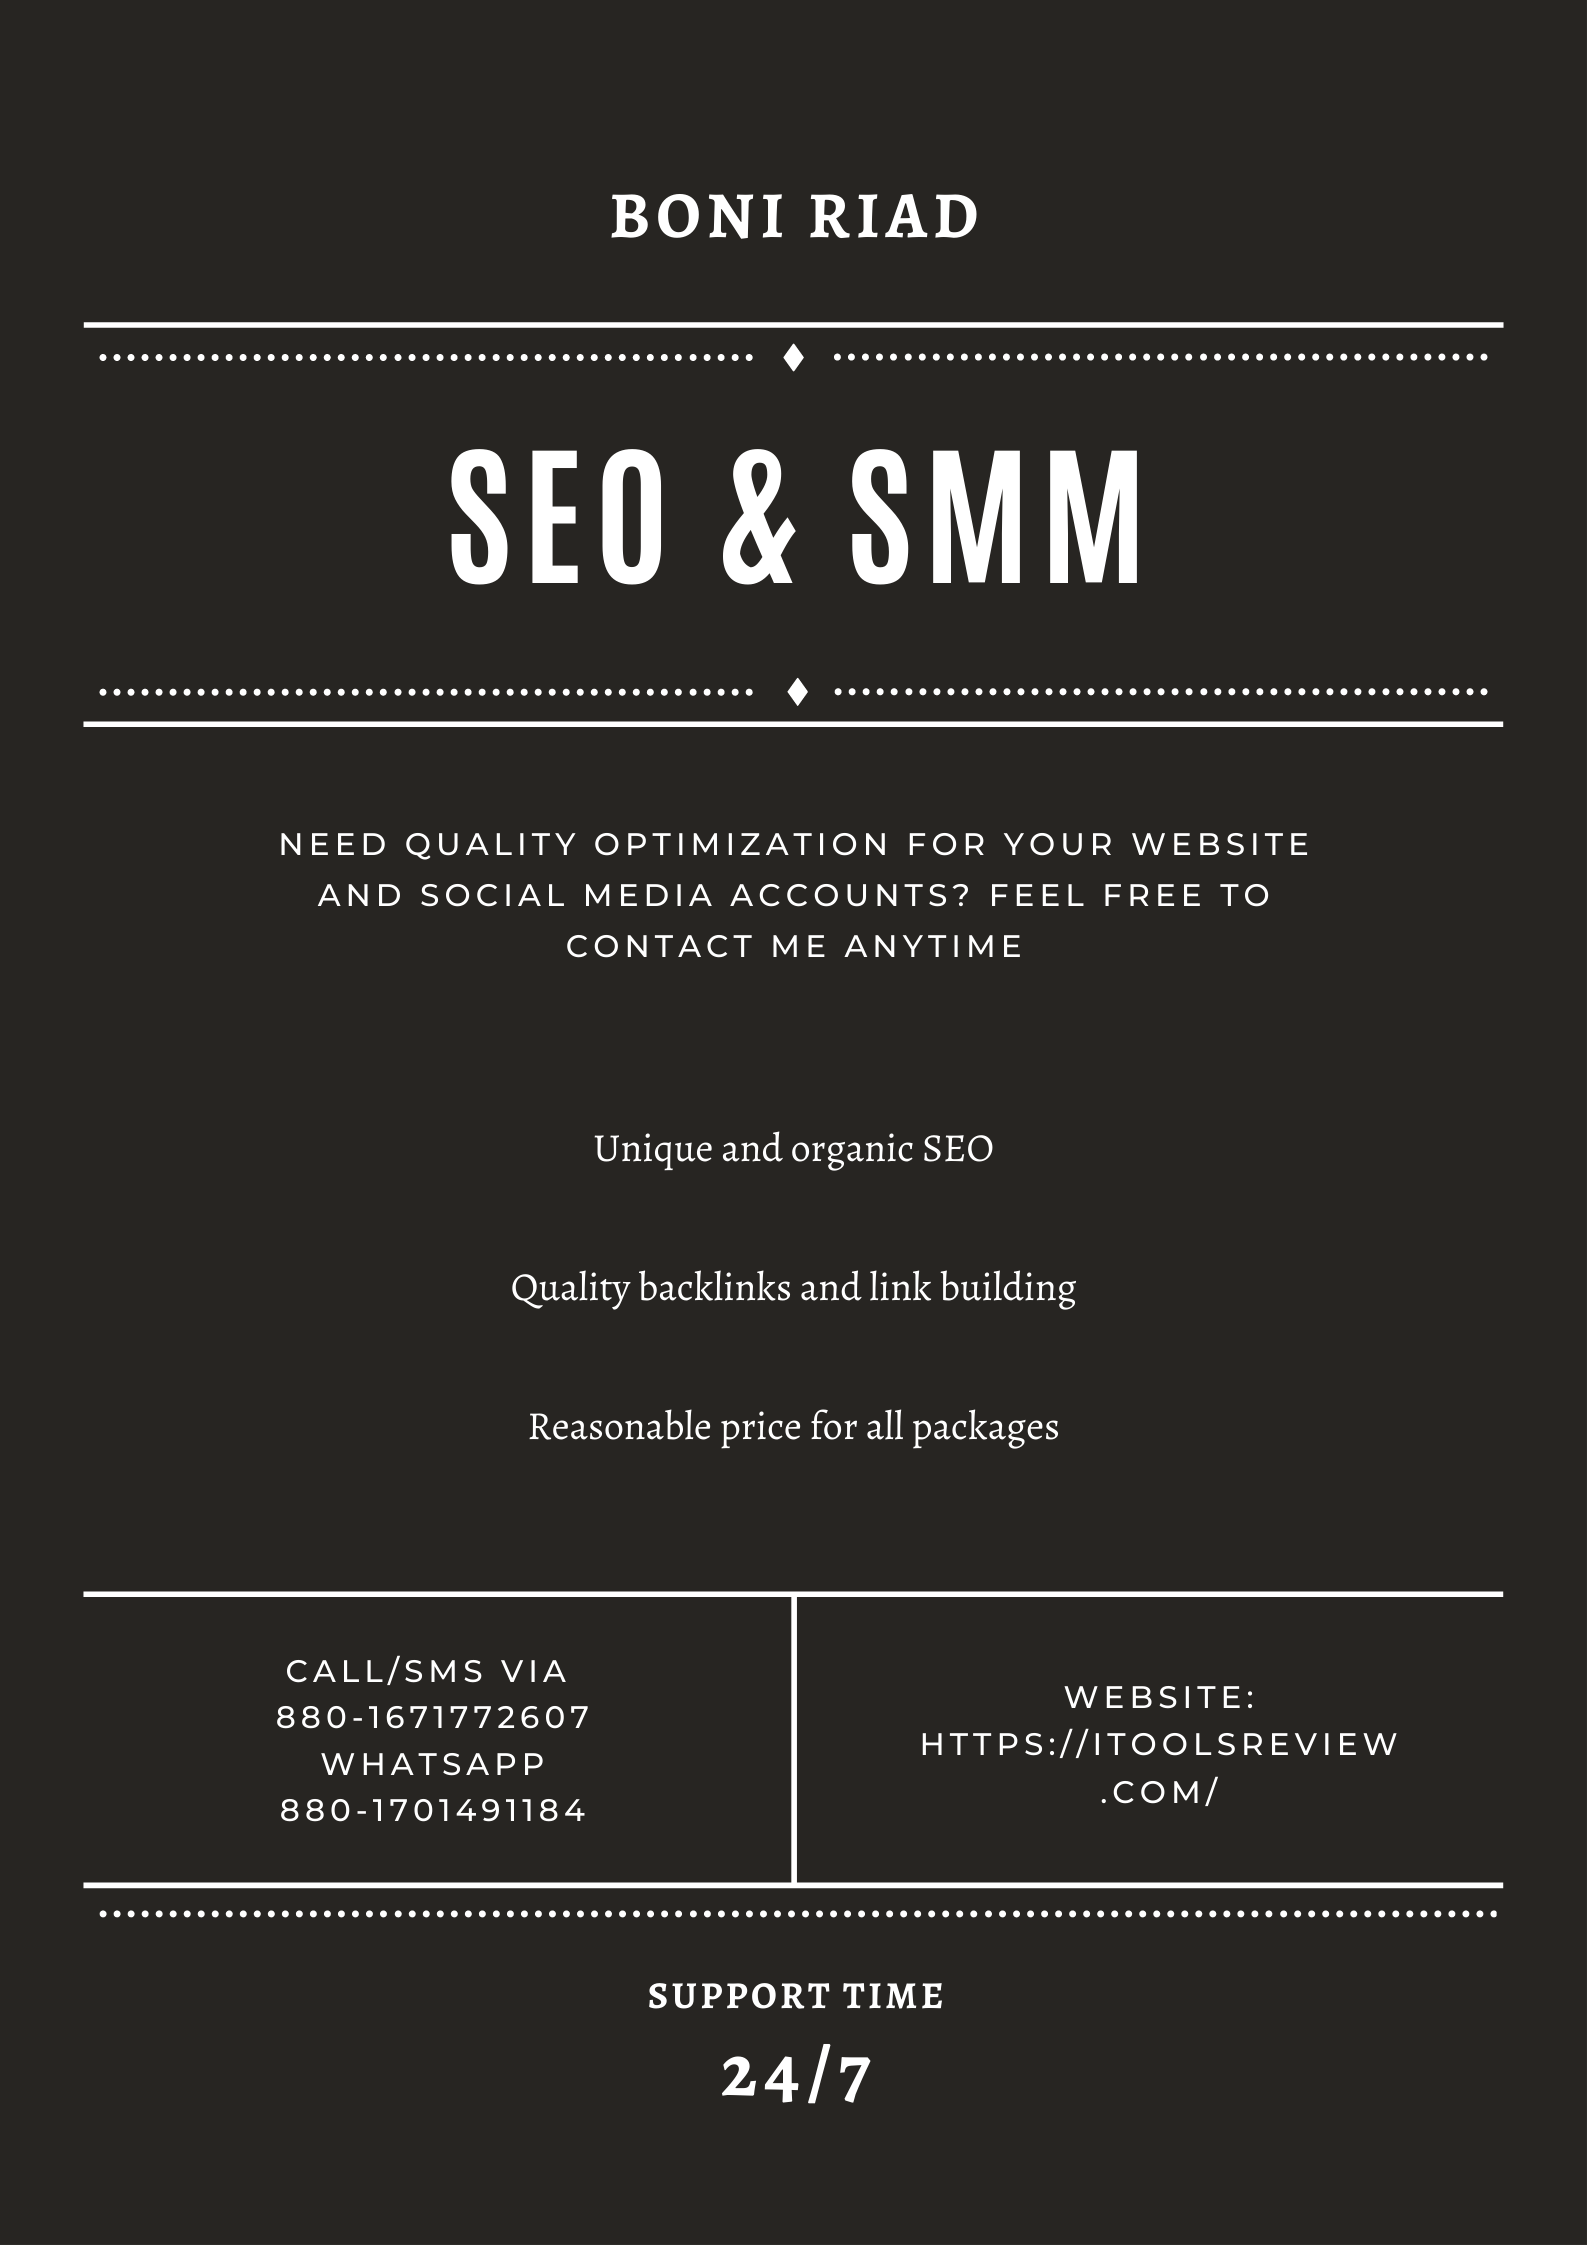 I'll Provide Quality SEO & SMM to grow your business